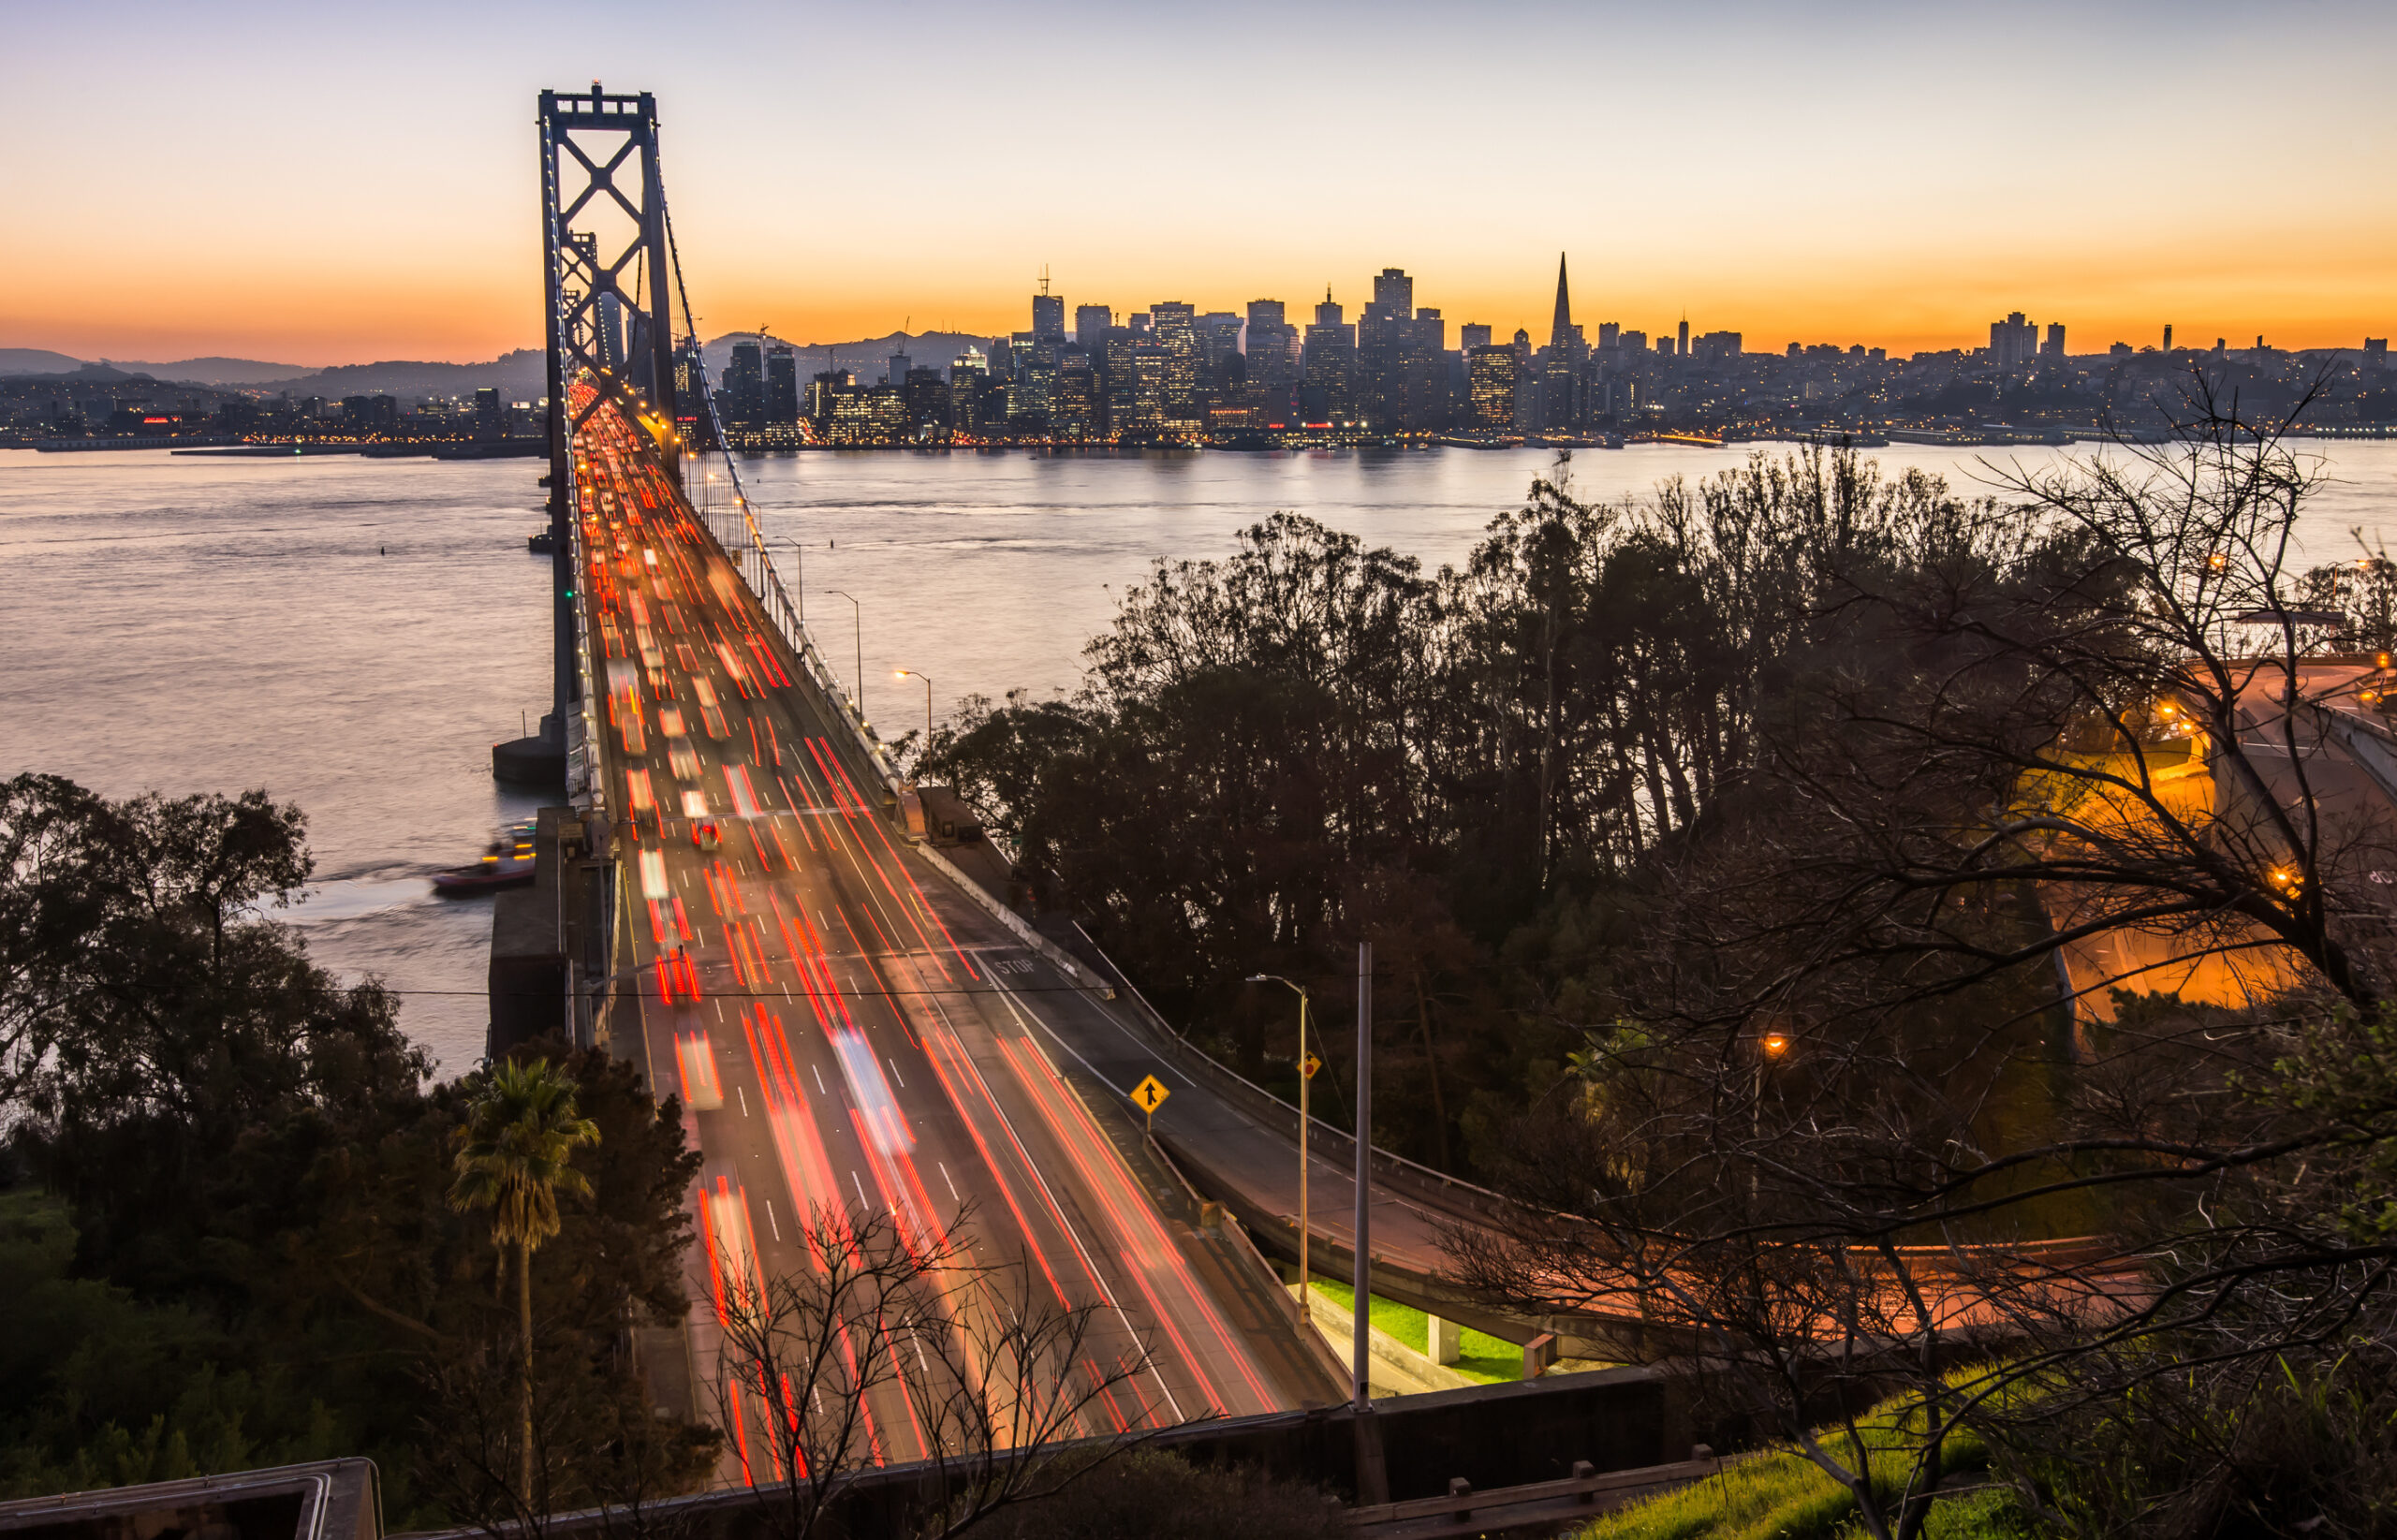 Naked Woman Who Allegedly Shot at Cars on Bay Bridge Faces Charges in San Francisco